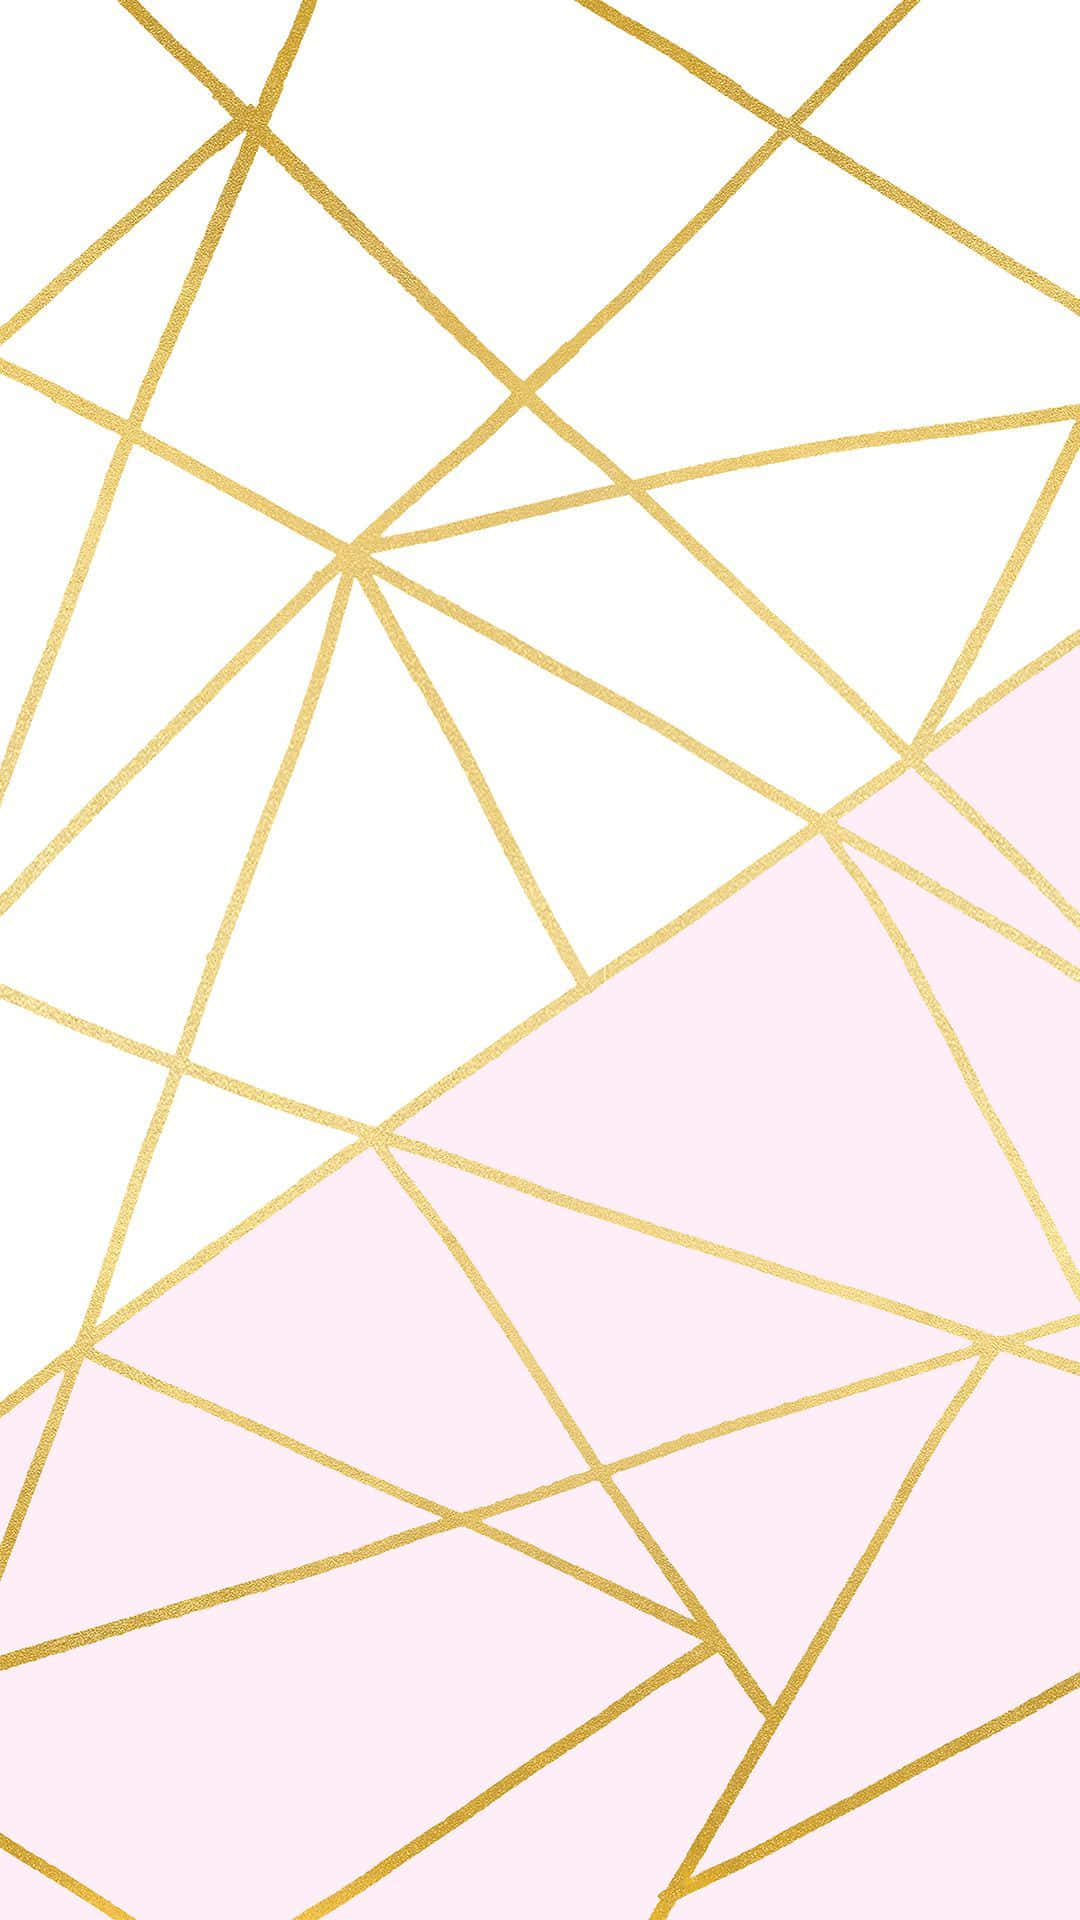 A Pink And Gold Geometric Pattern With Lines